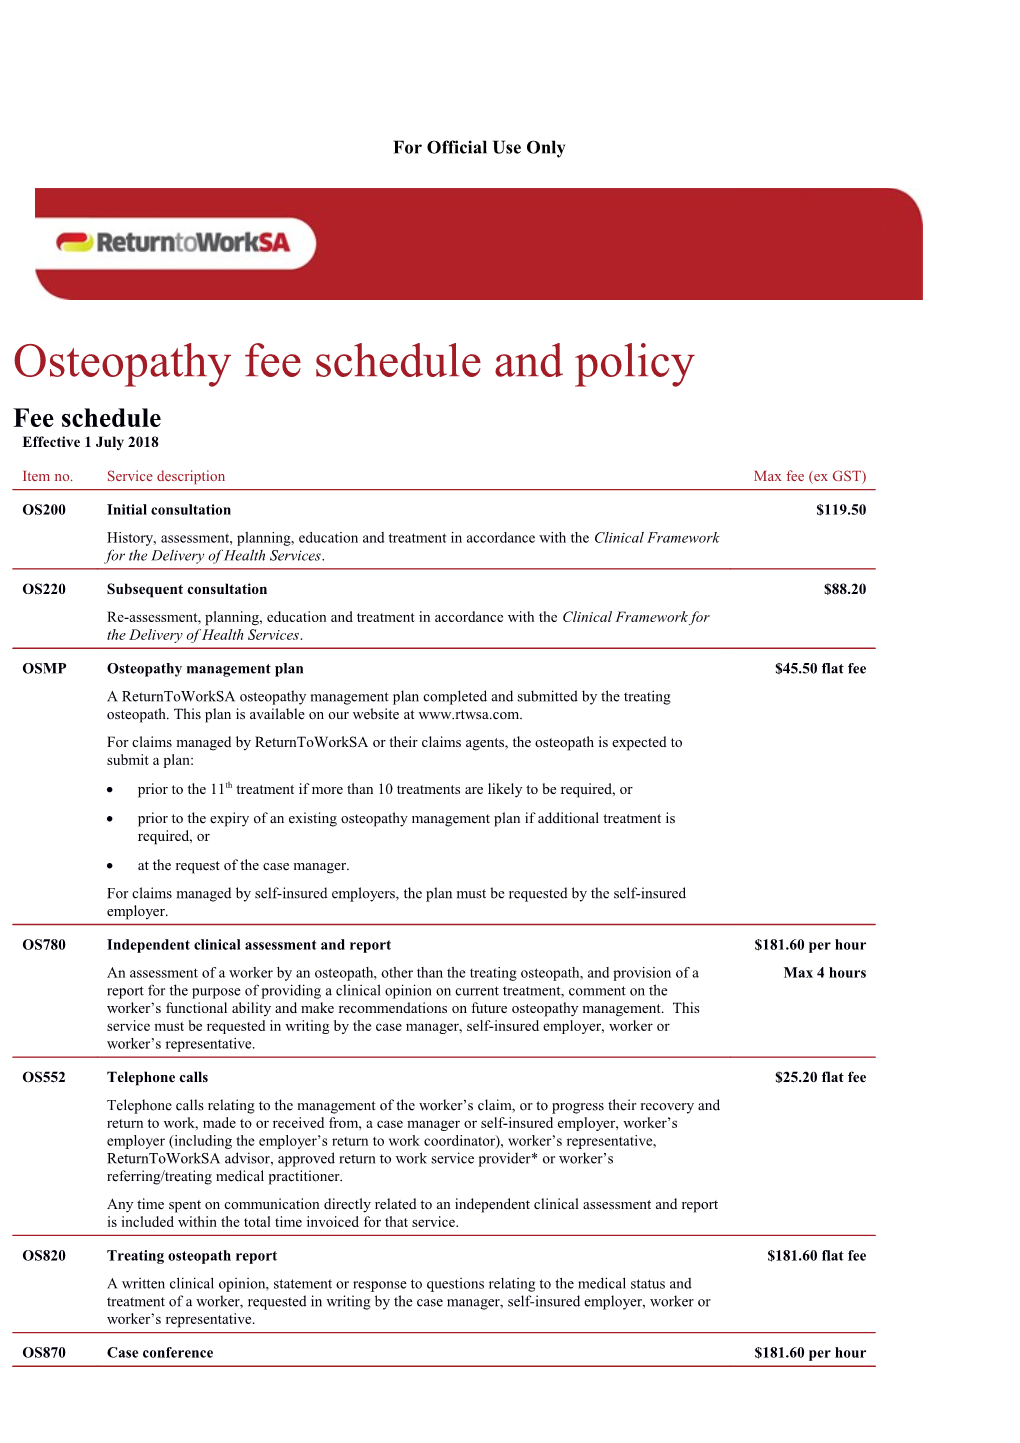 Osteopathy Fee Schedule and Policy